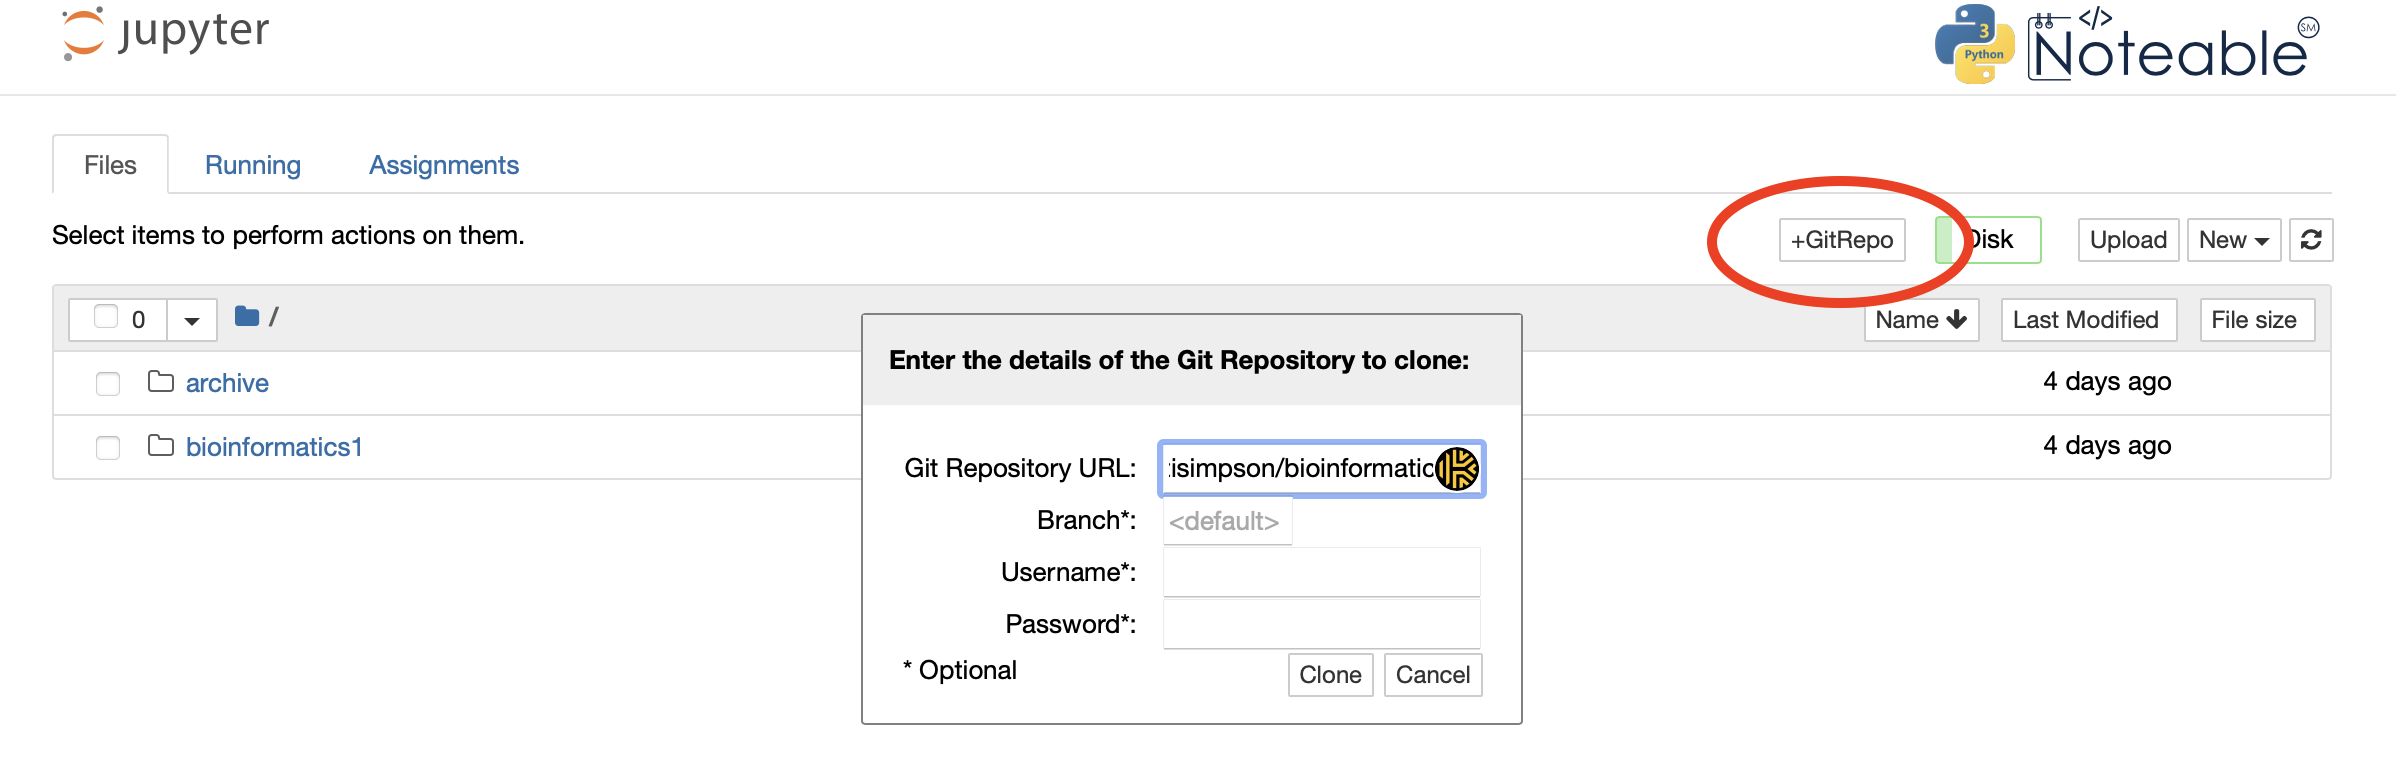 Image showing location for GitHub repo cloning in notable